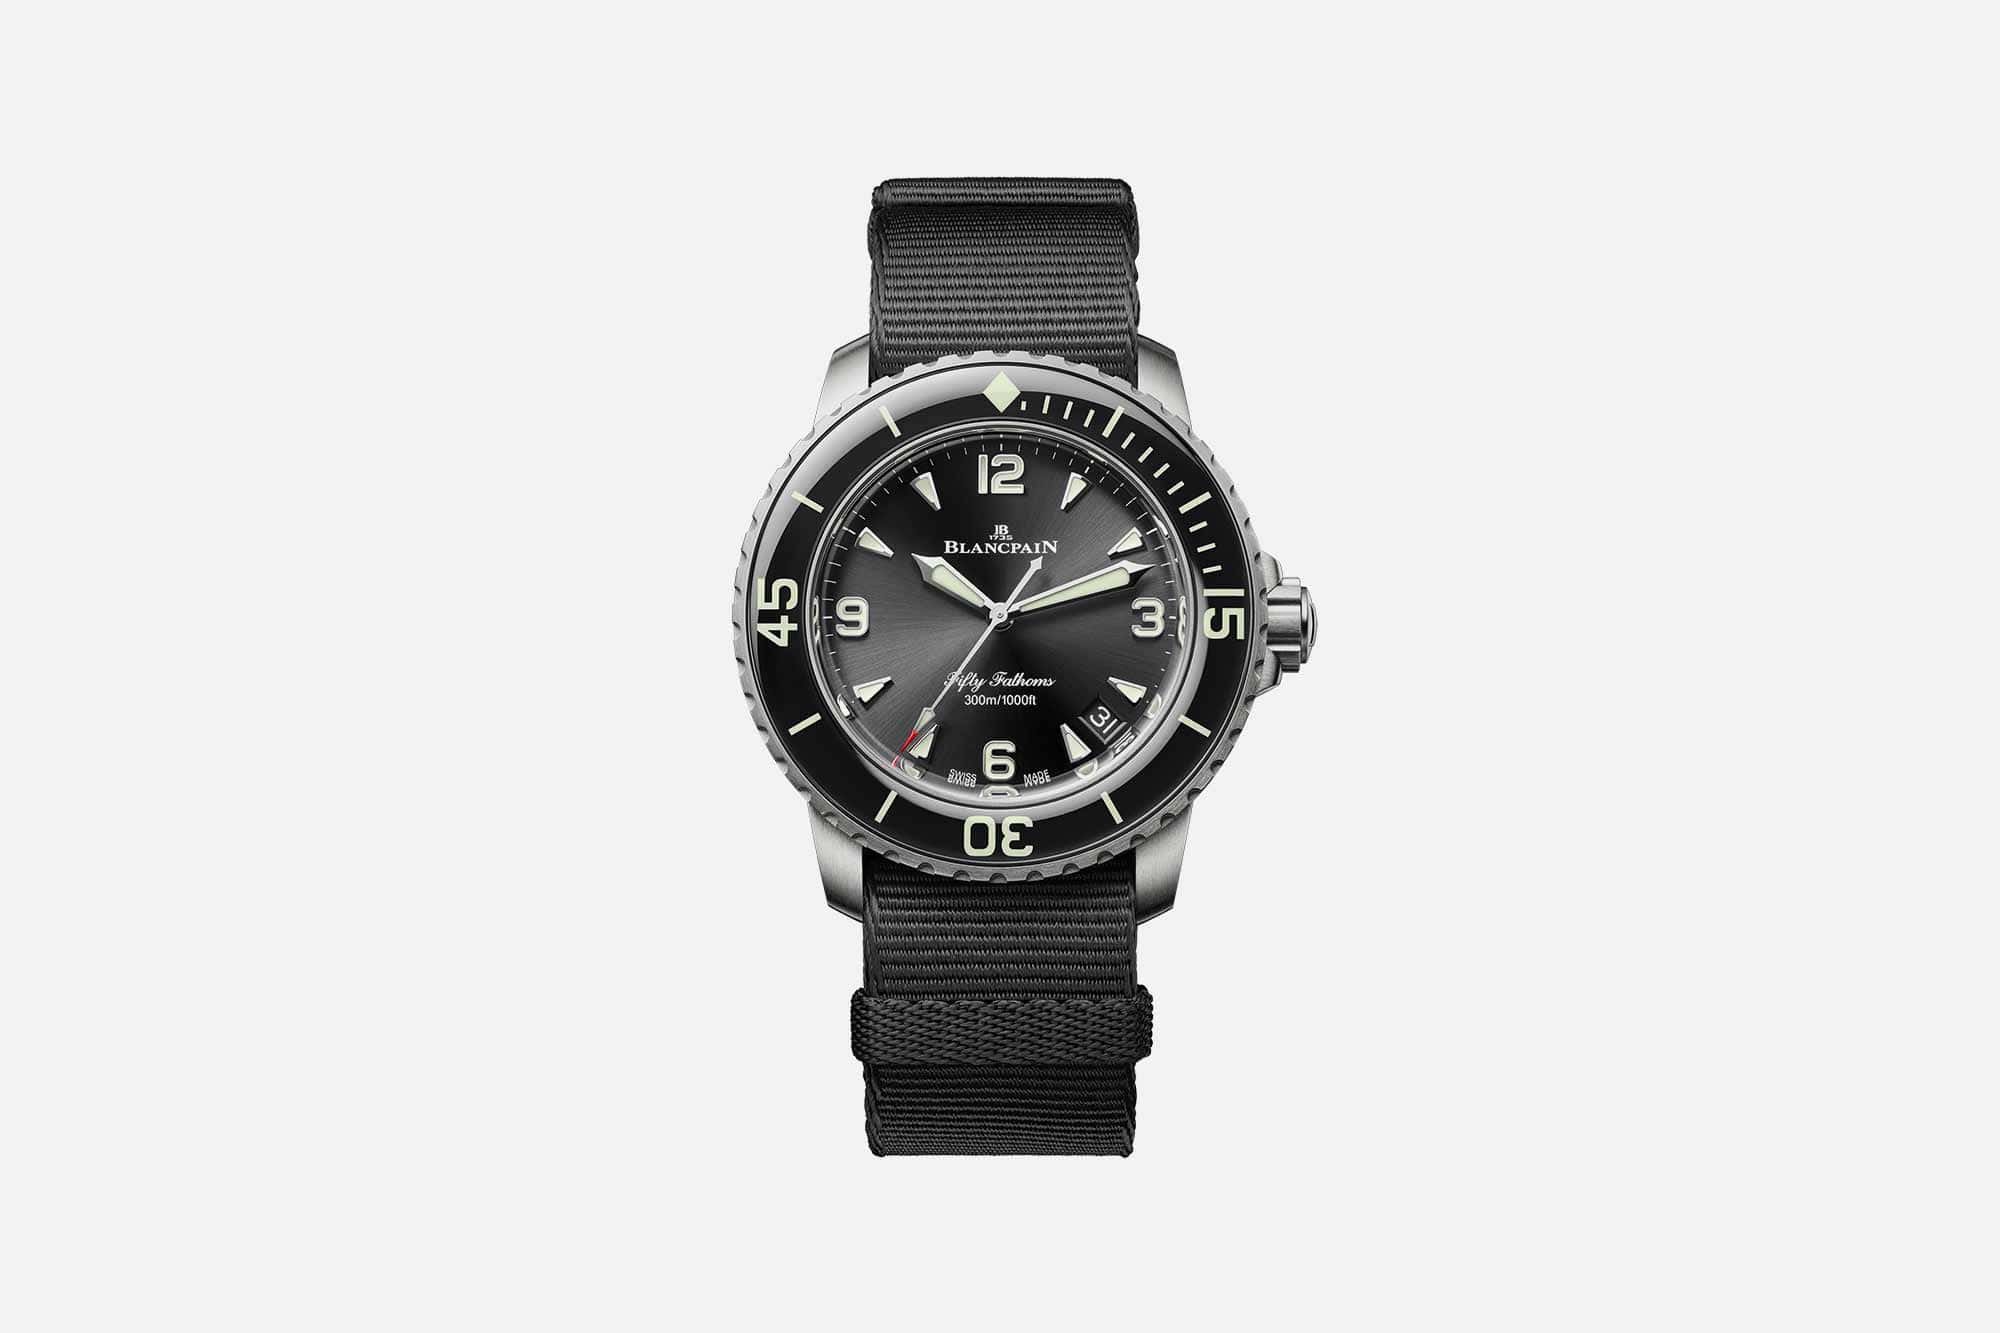 Blancpain Finally Gives Fifty Fathoms Fans What They’ve Been Asking For